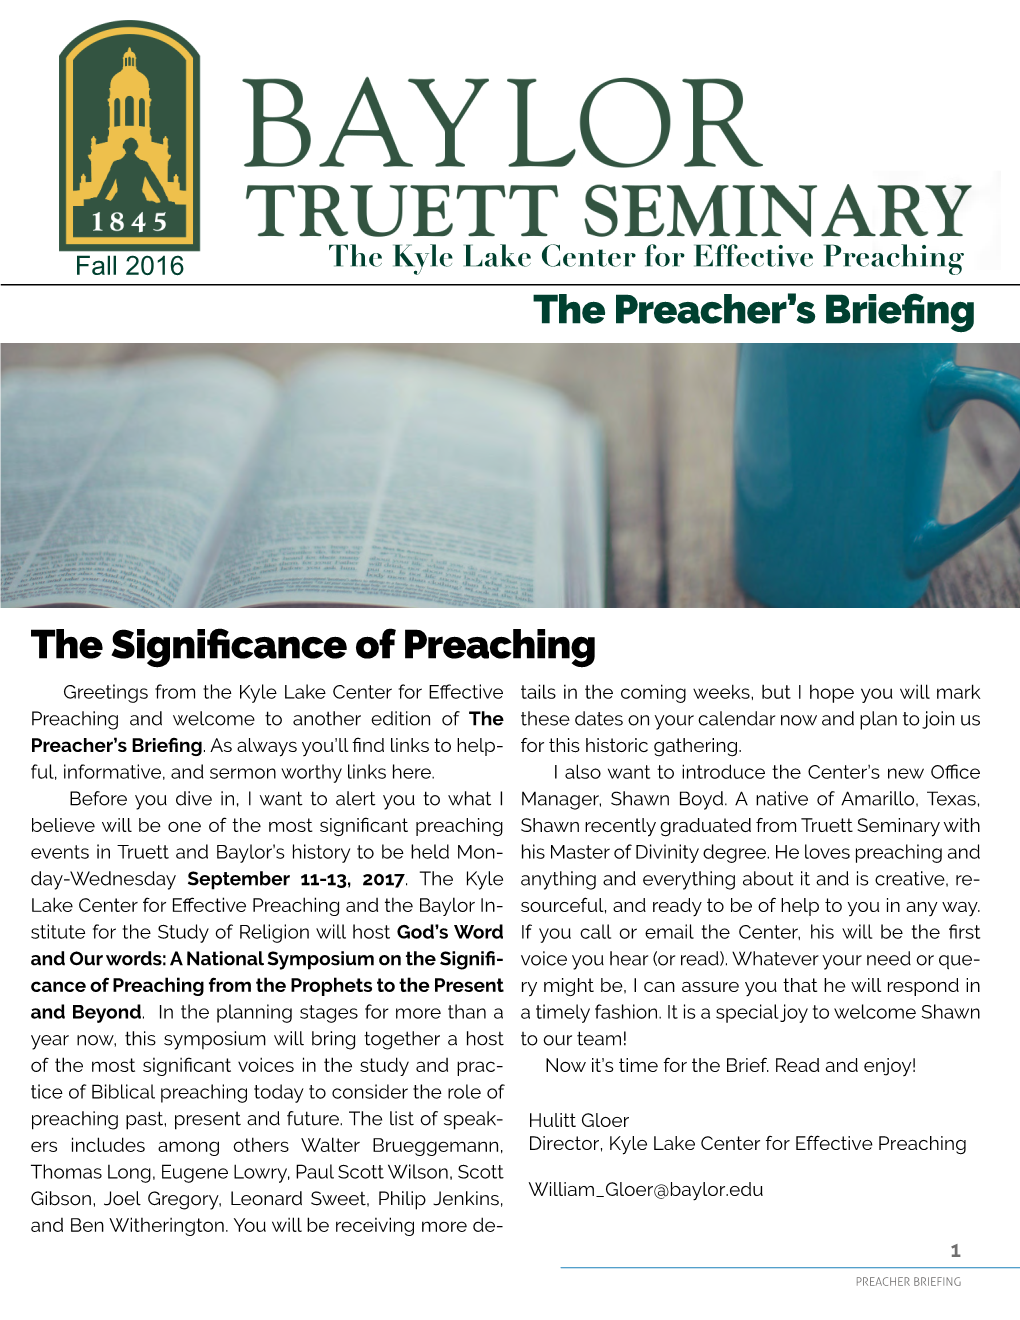 The Preacher's Briefing the Significance of Preaching